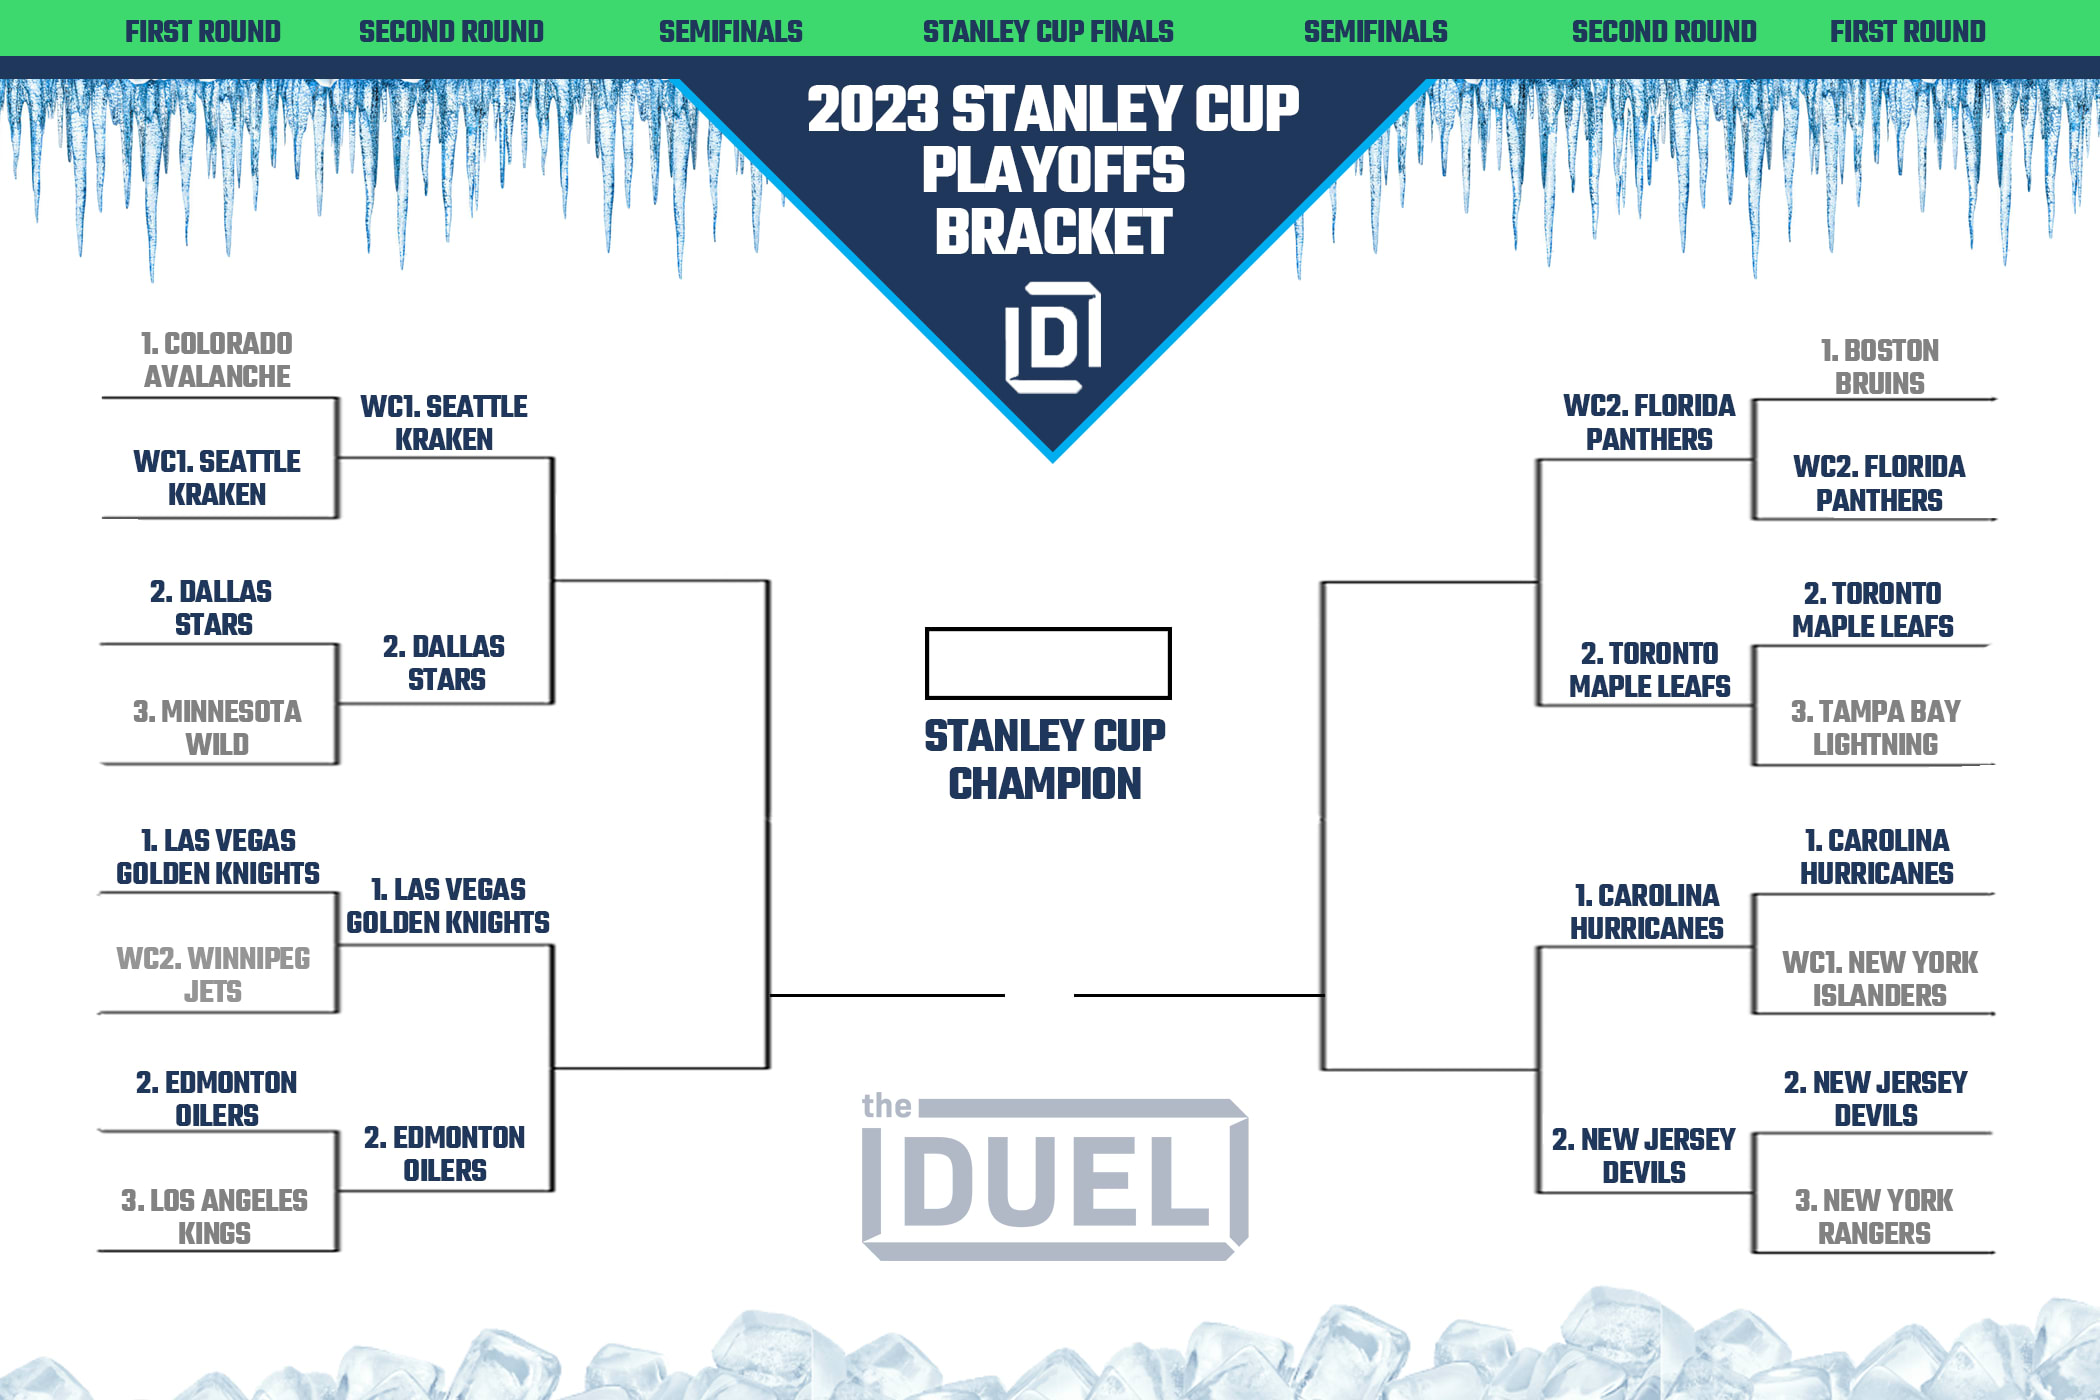 Follow our Stanley Cup playoffs bracket challenge!